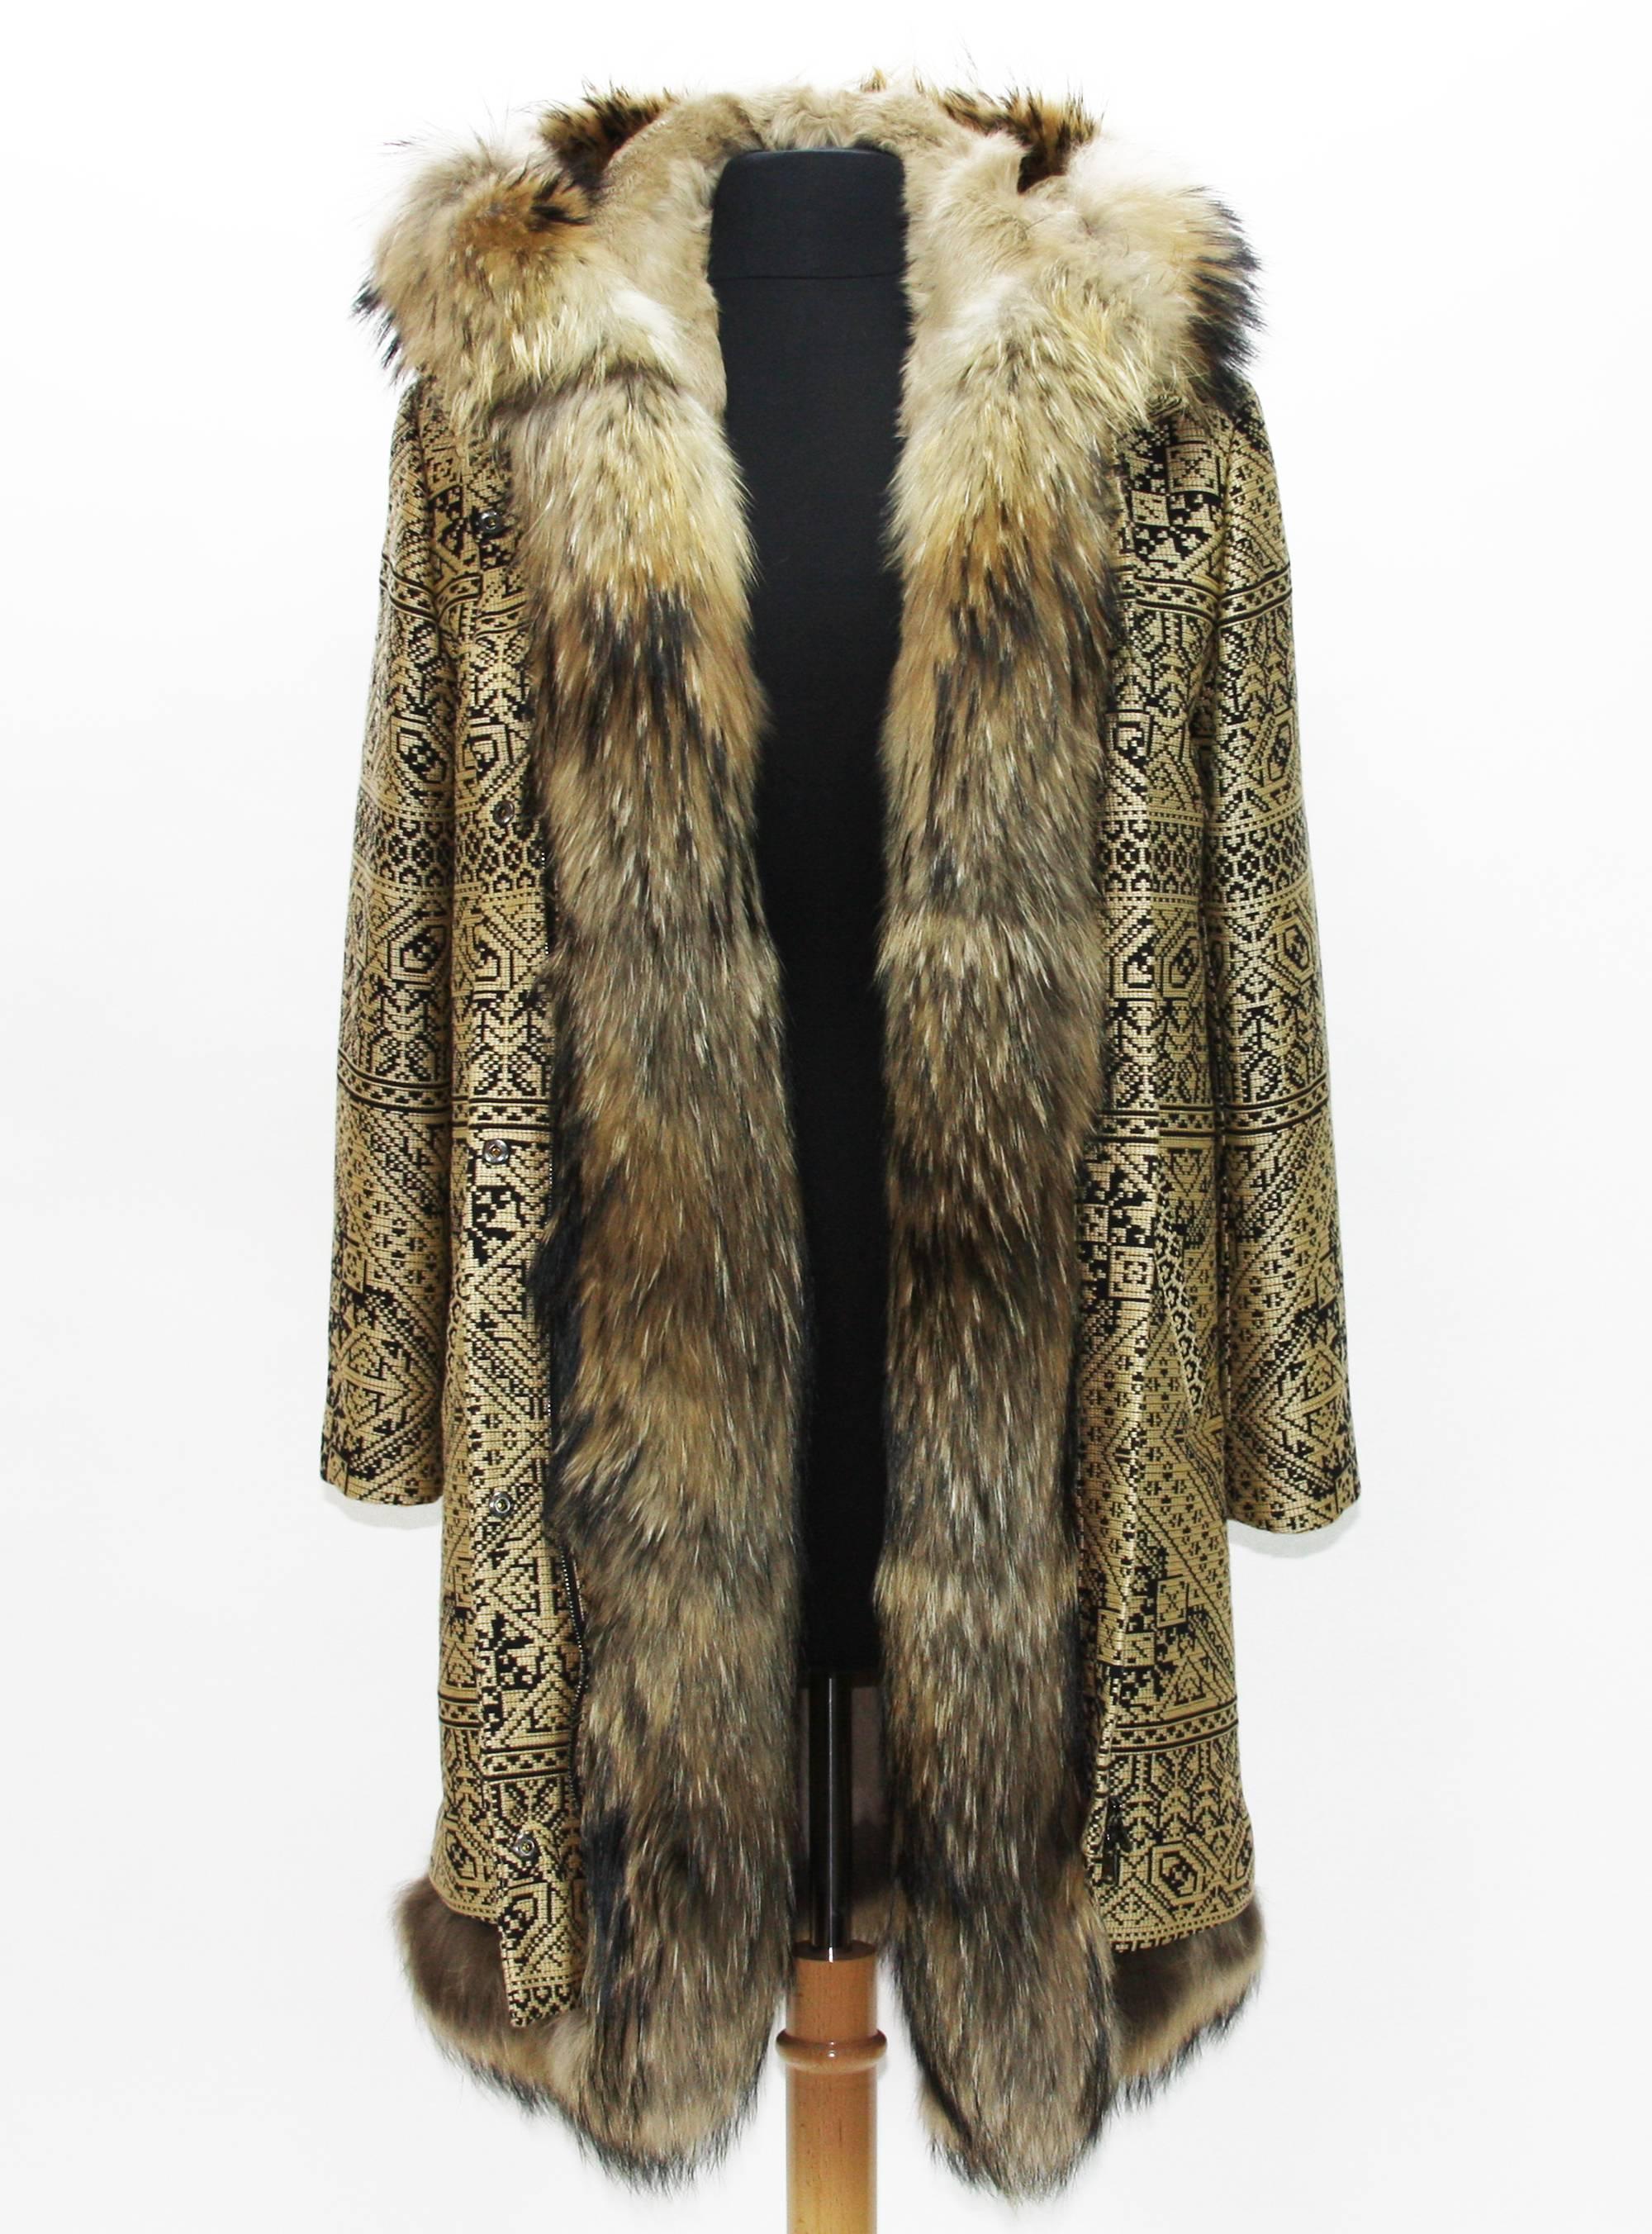 ETRO JACQUARD FUR LINING HOODED COAT
ITALIAN SIZE 44 – US 8
DETACHABLE FUR LINING – 90% DYED RABBIT, 10% ASIATIC RACCOON
ORIGIN – SPAIN & FINLAND
COAT FABRIC CONTENT – 52% VOSCOSE, 48% COTTON
FRONT ZIPPER AND FASTENING CLOSURE
ATTACHED